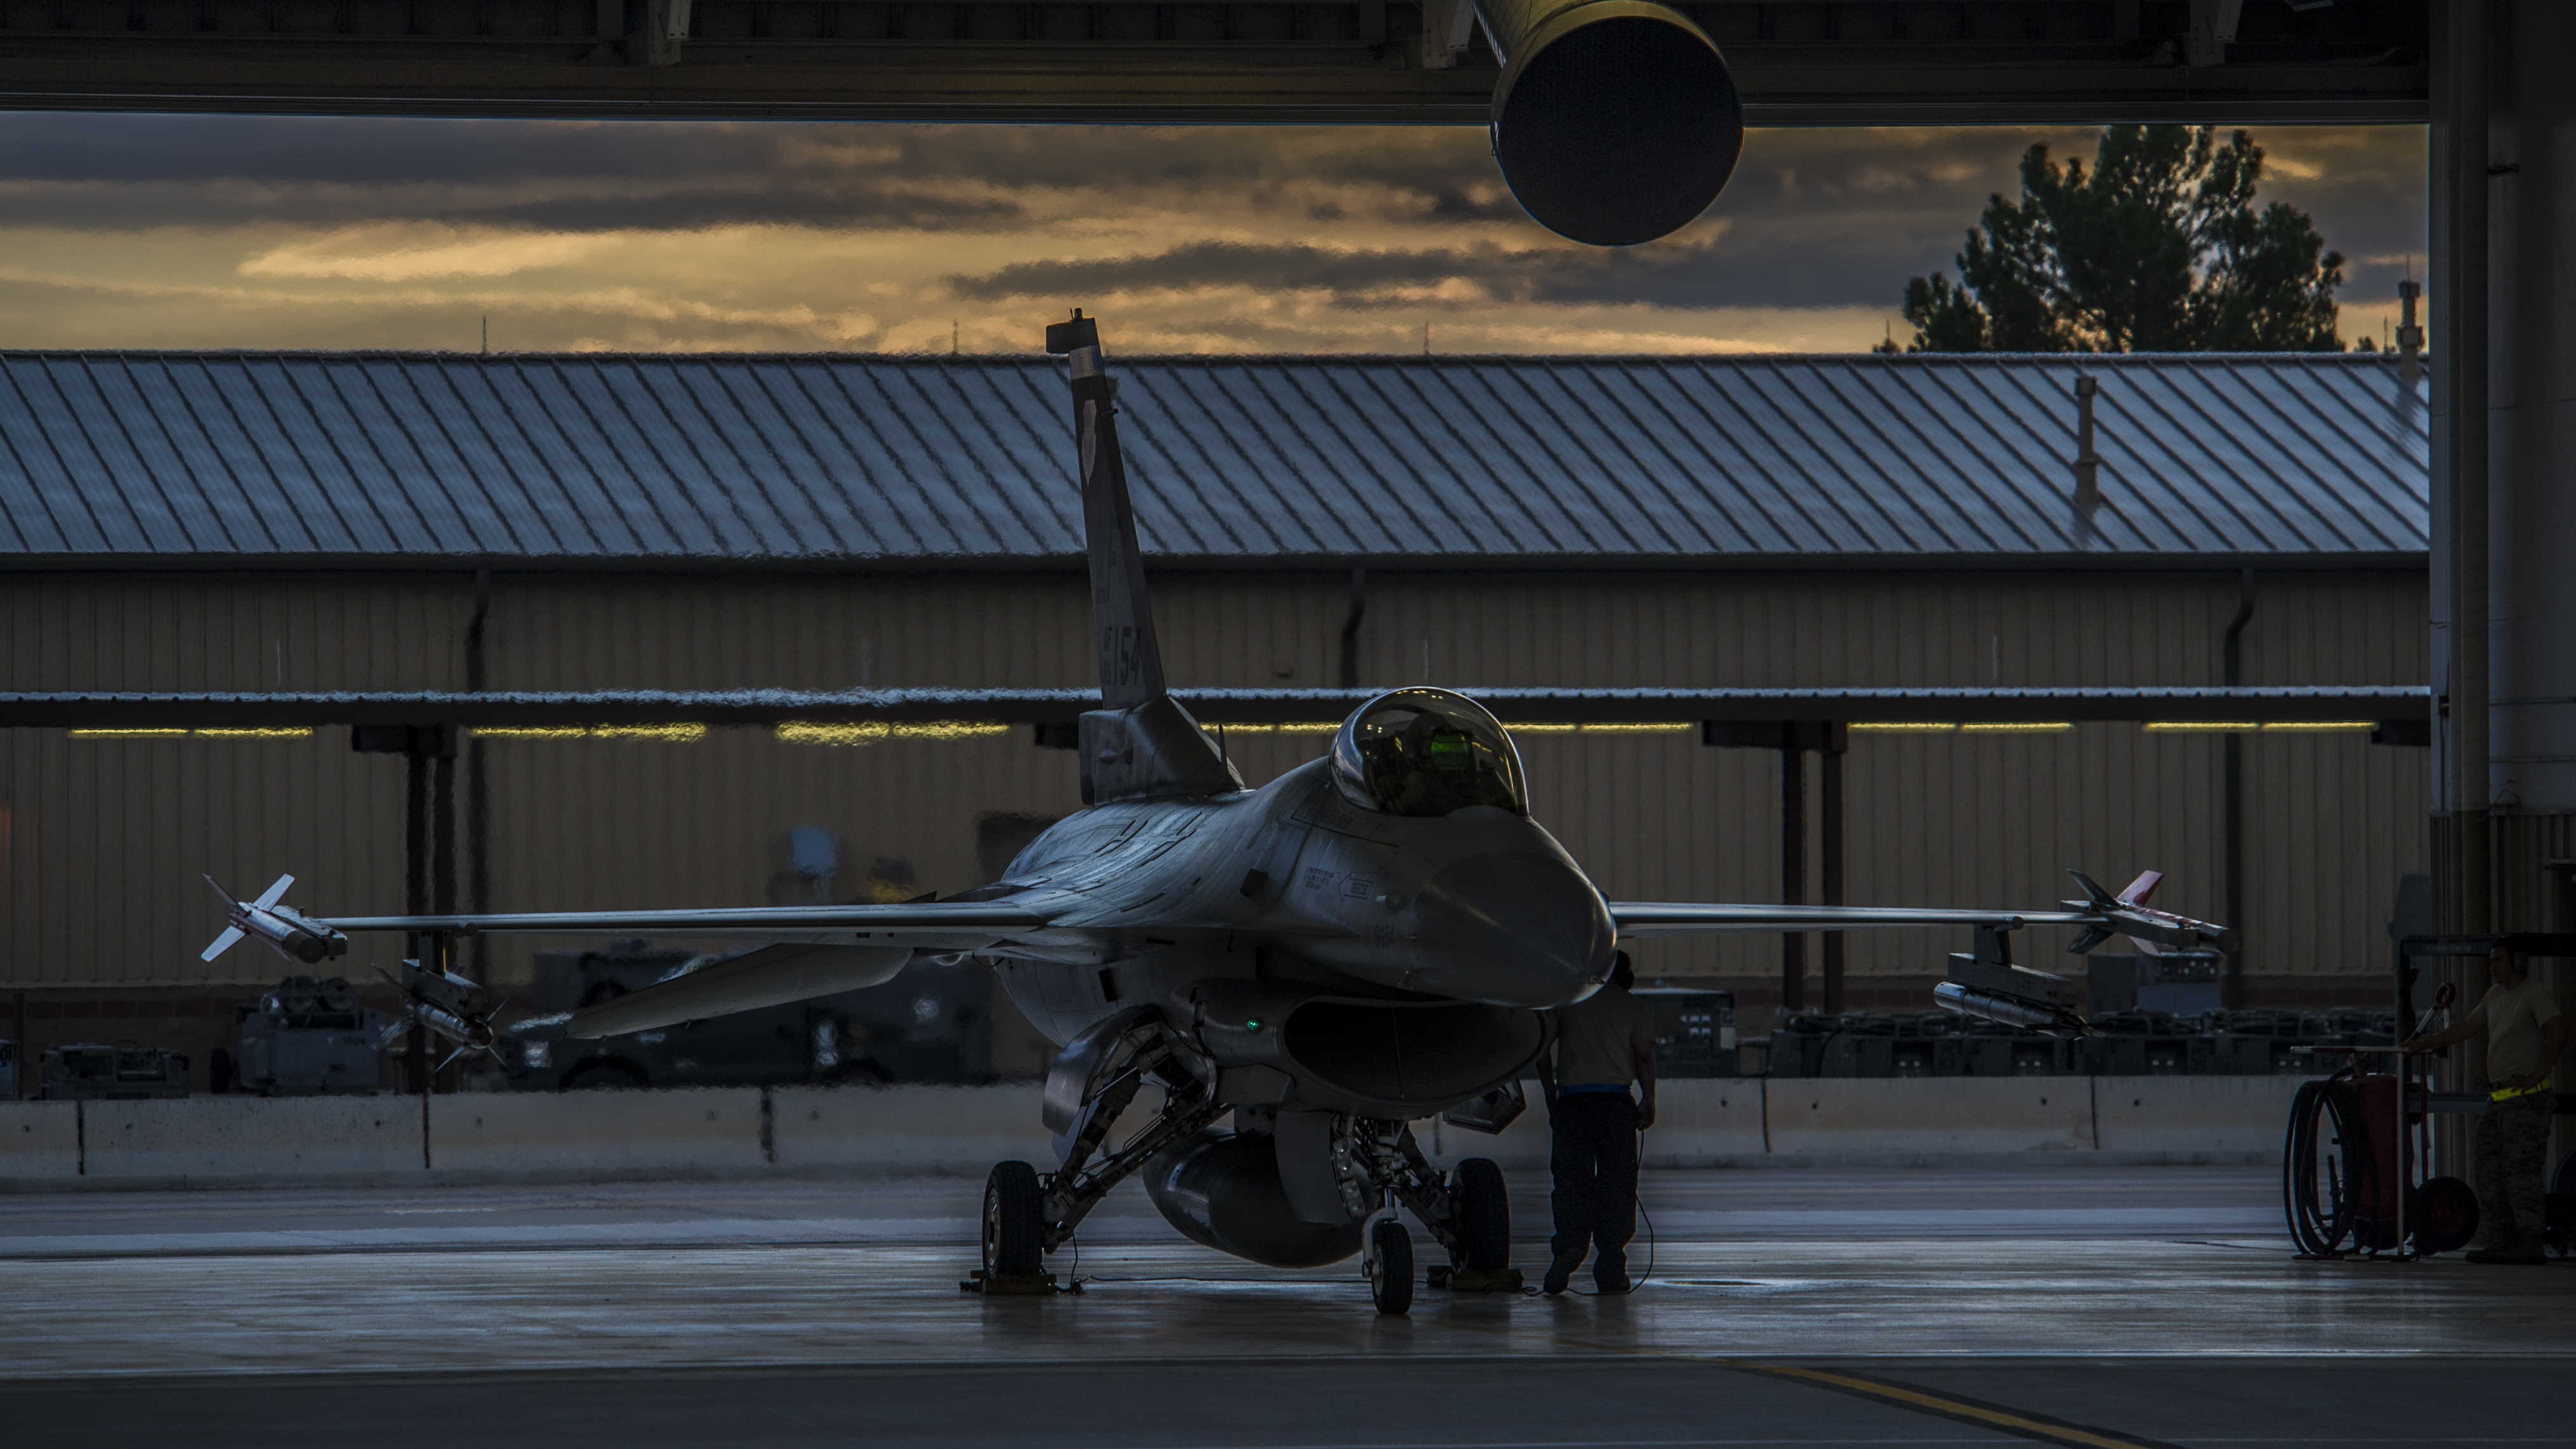 General 4059x2283 airplane military aircraft US Air Force General Dynamics F-16 Fighting Falcon